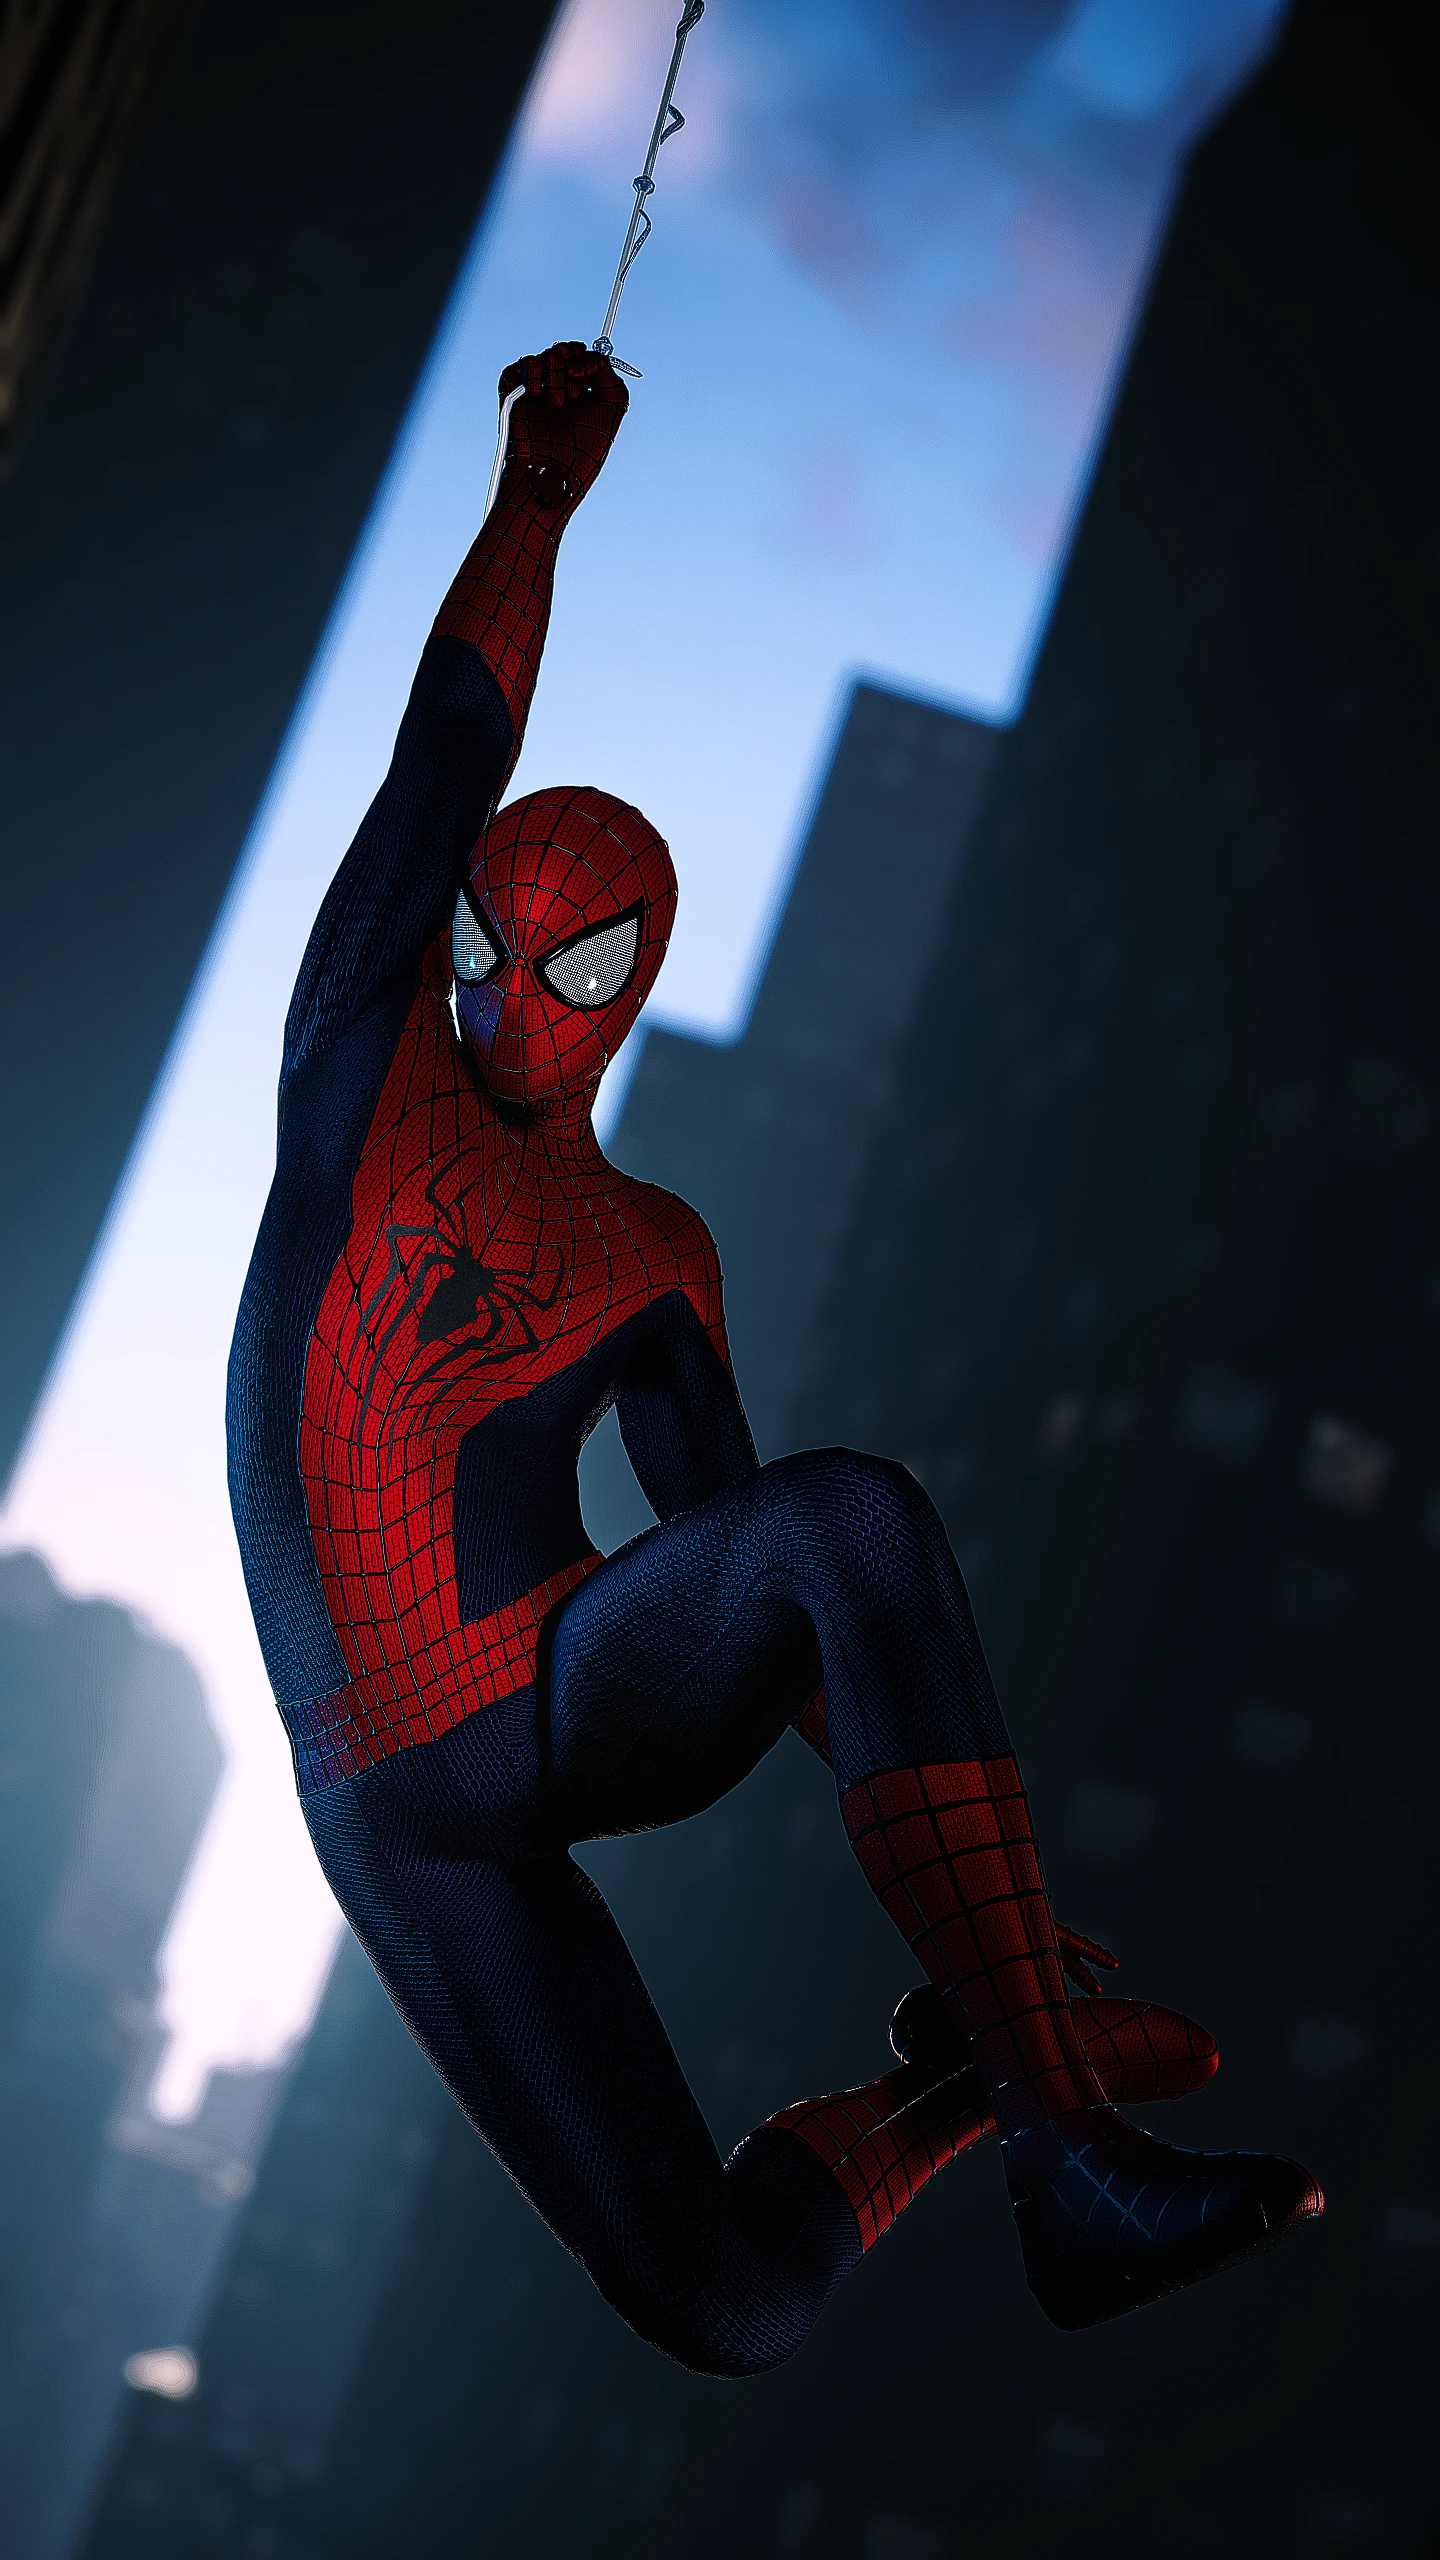 Check Out This AMAZING Image at Marvel's Spider-Man Remastered Nexus - Mods  and community